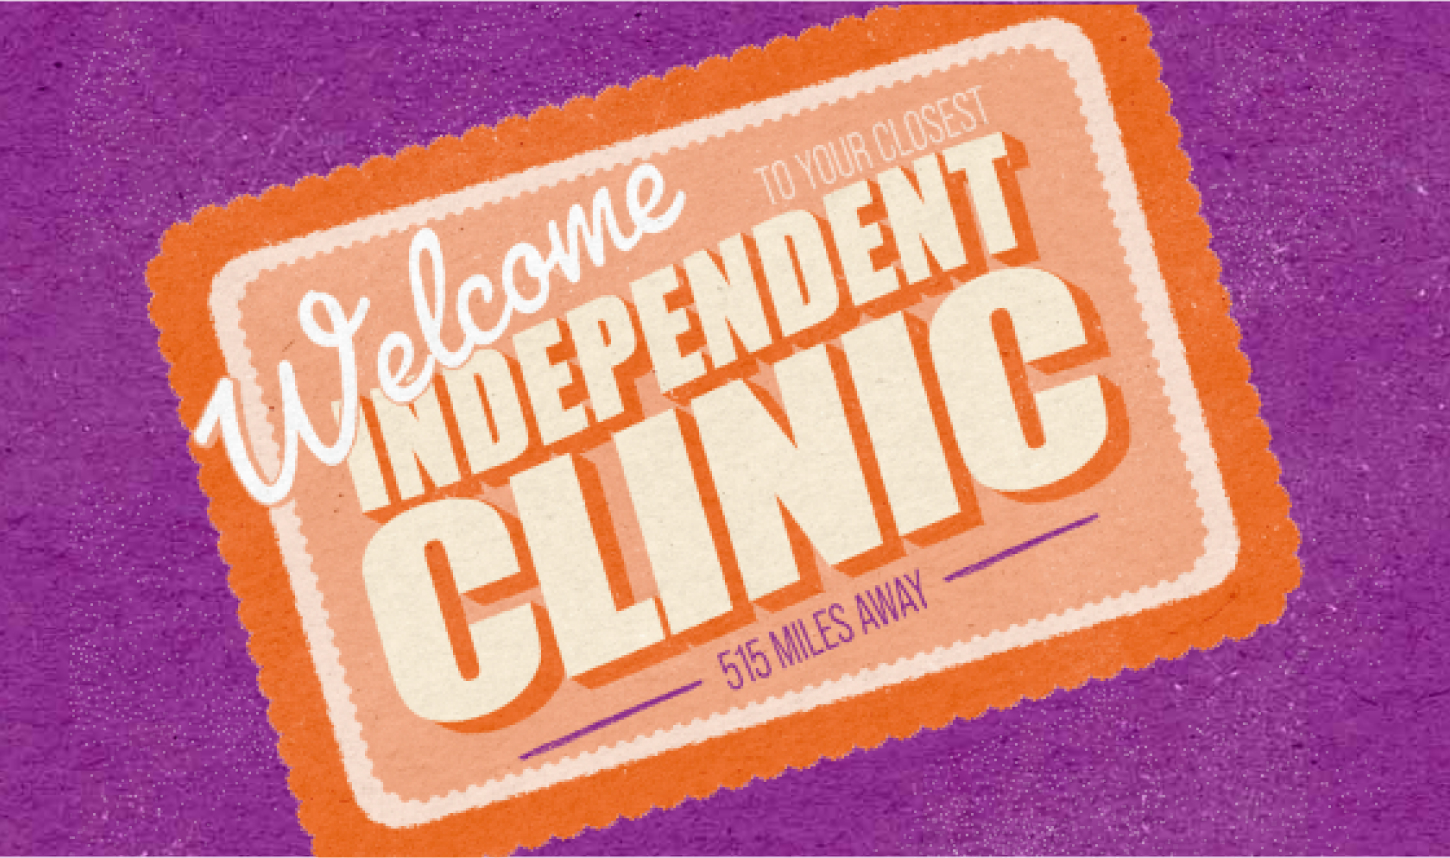 An orange and purple illustration of a postcard that says “Welcome to your closest independent clinic - 515 miles away”.